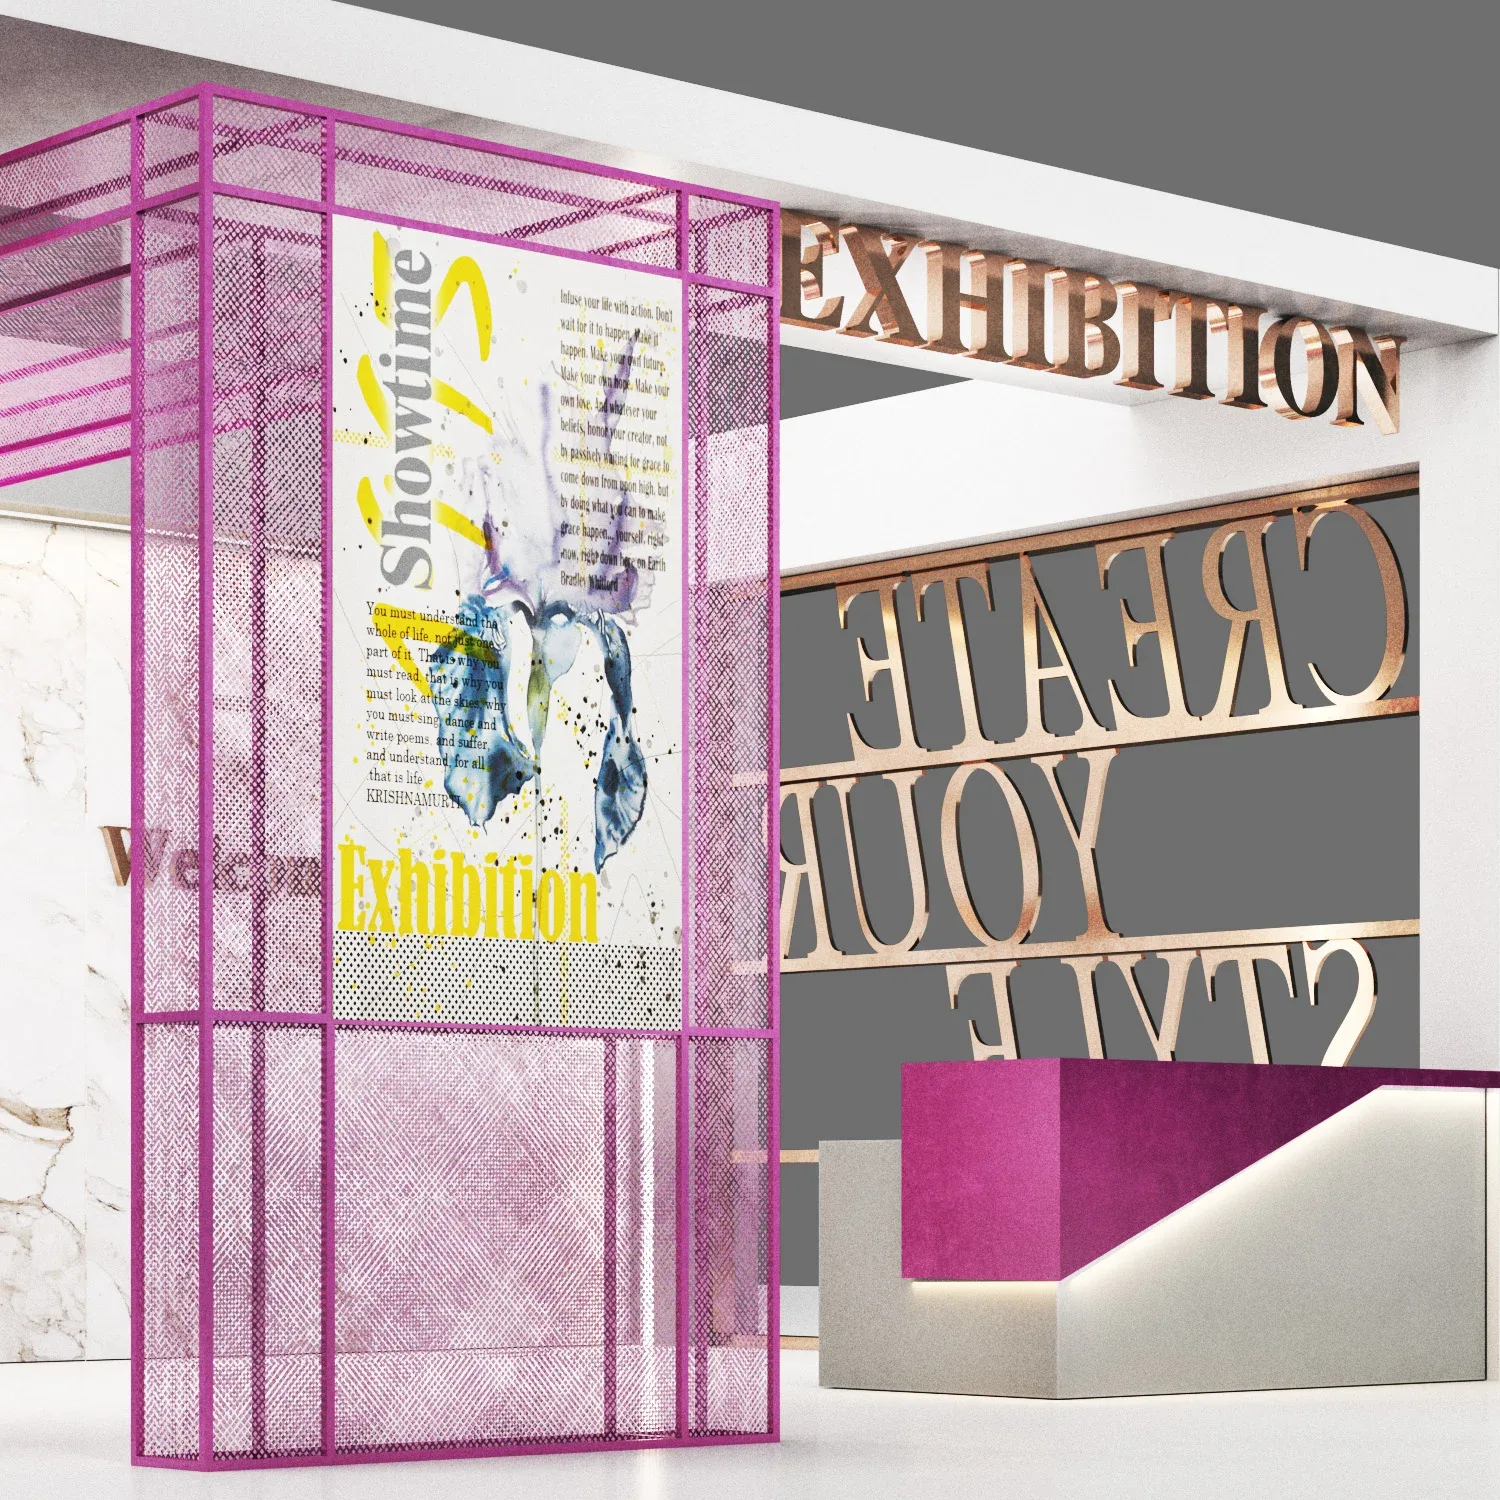 kiosk booth exhibition presentation stand counter reception office desk02